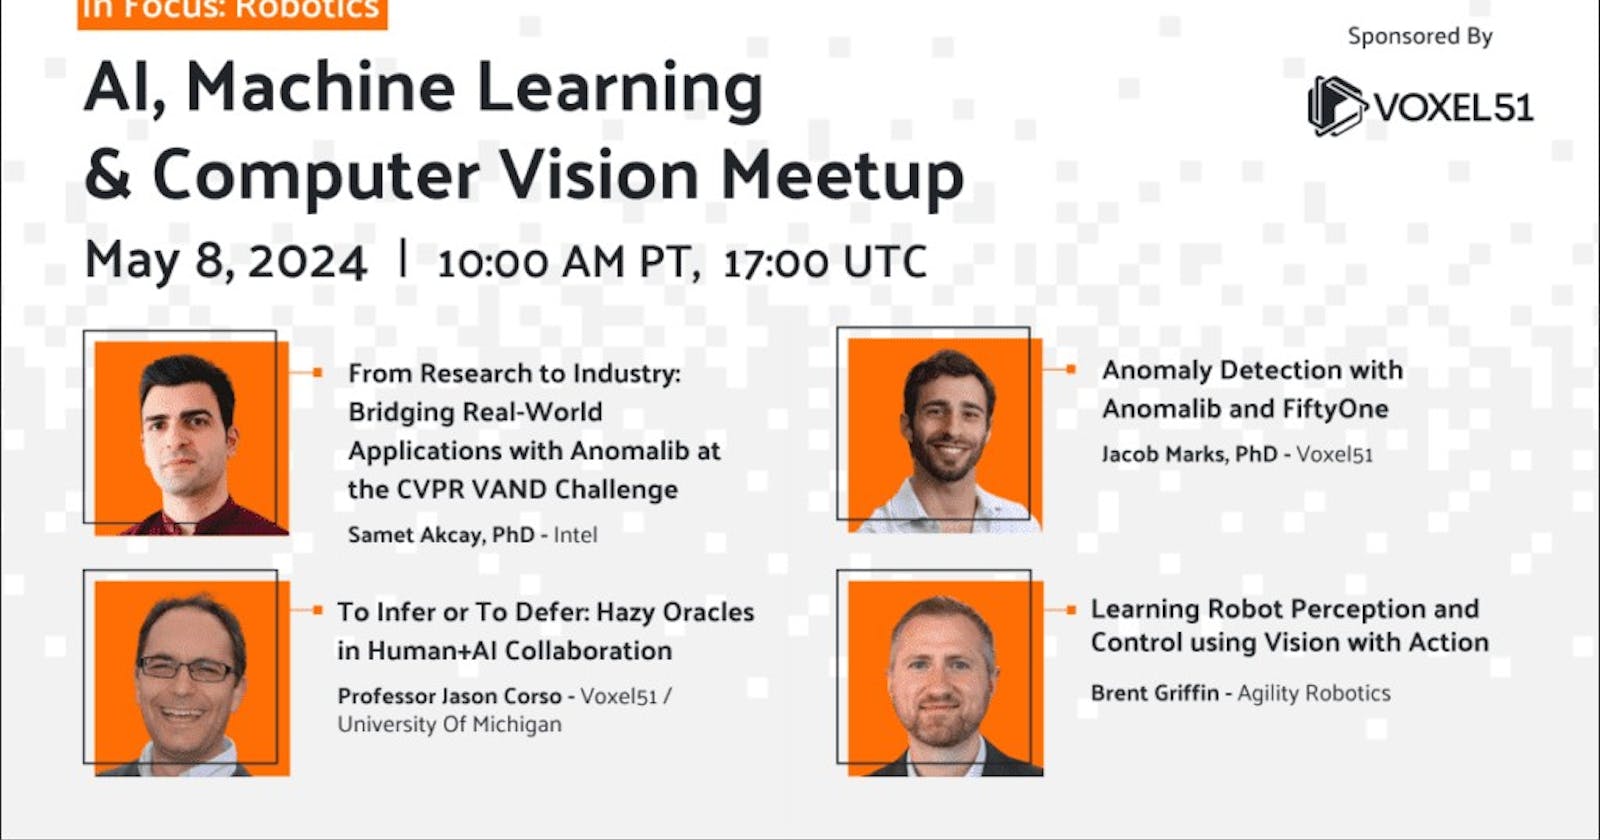 May 8, 2024 AI, Machine Learning and Computer Vision Meetup